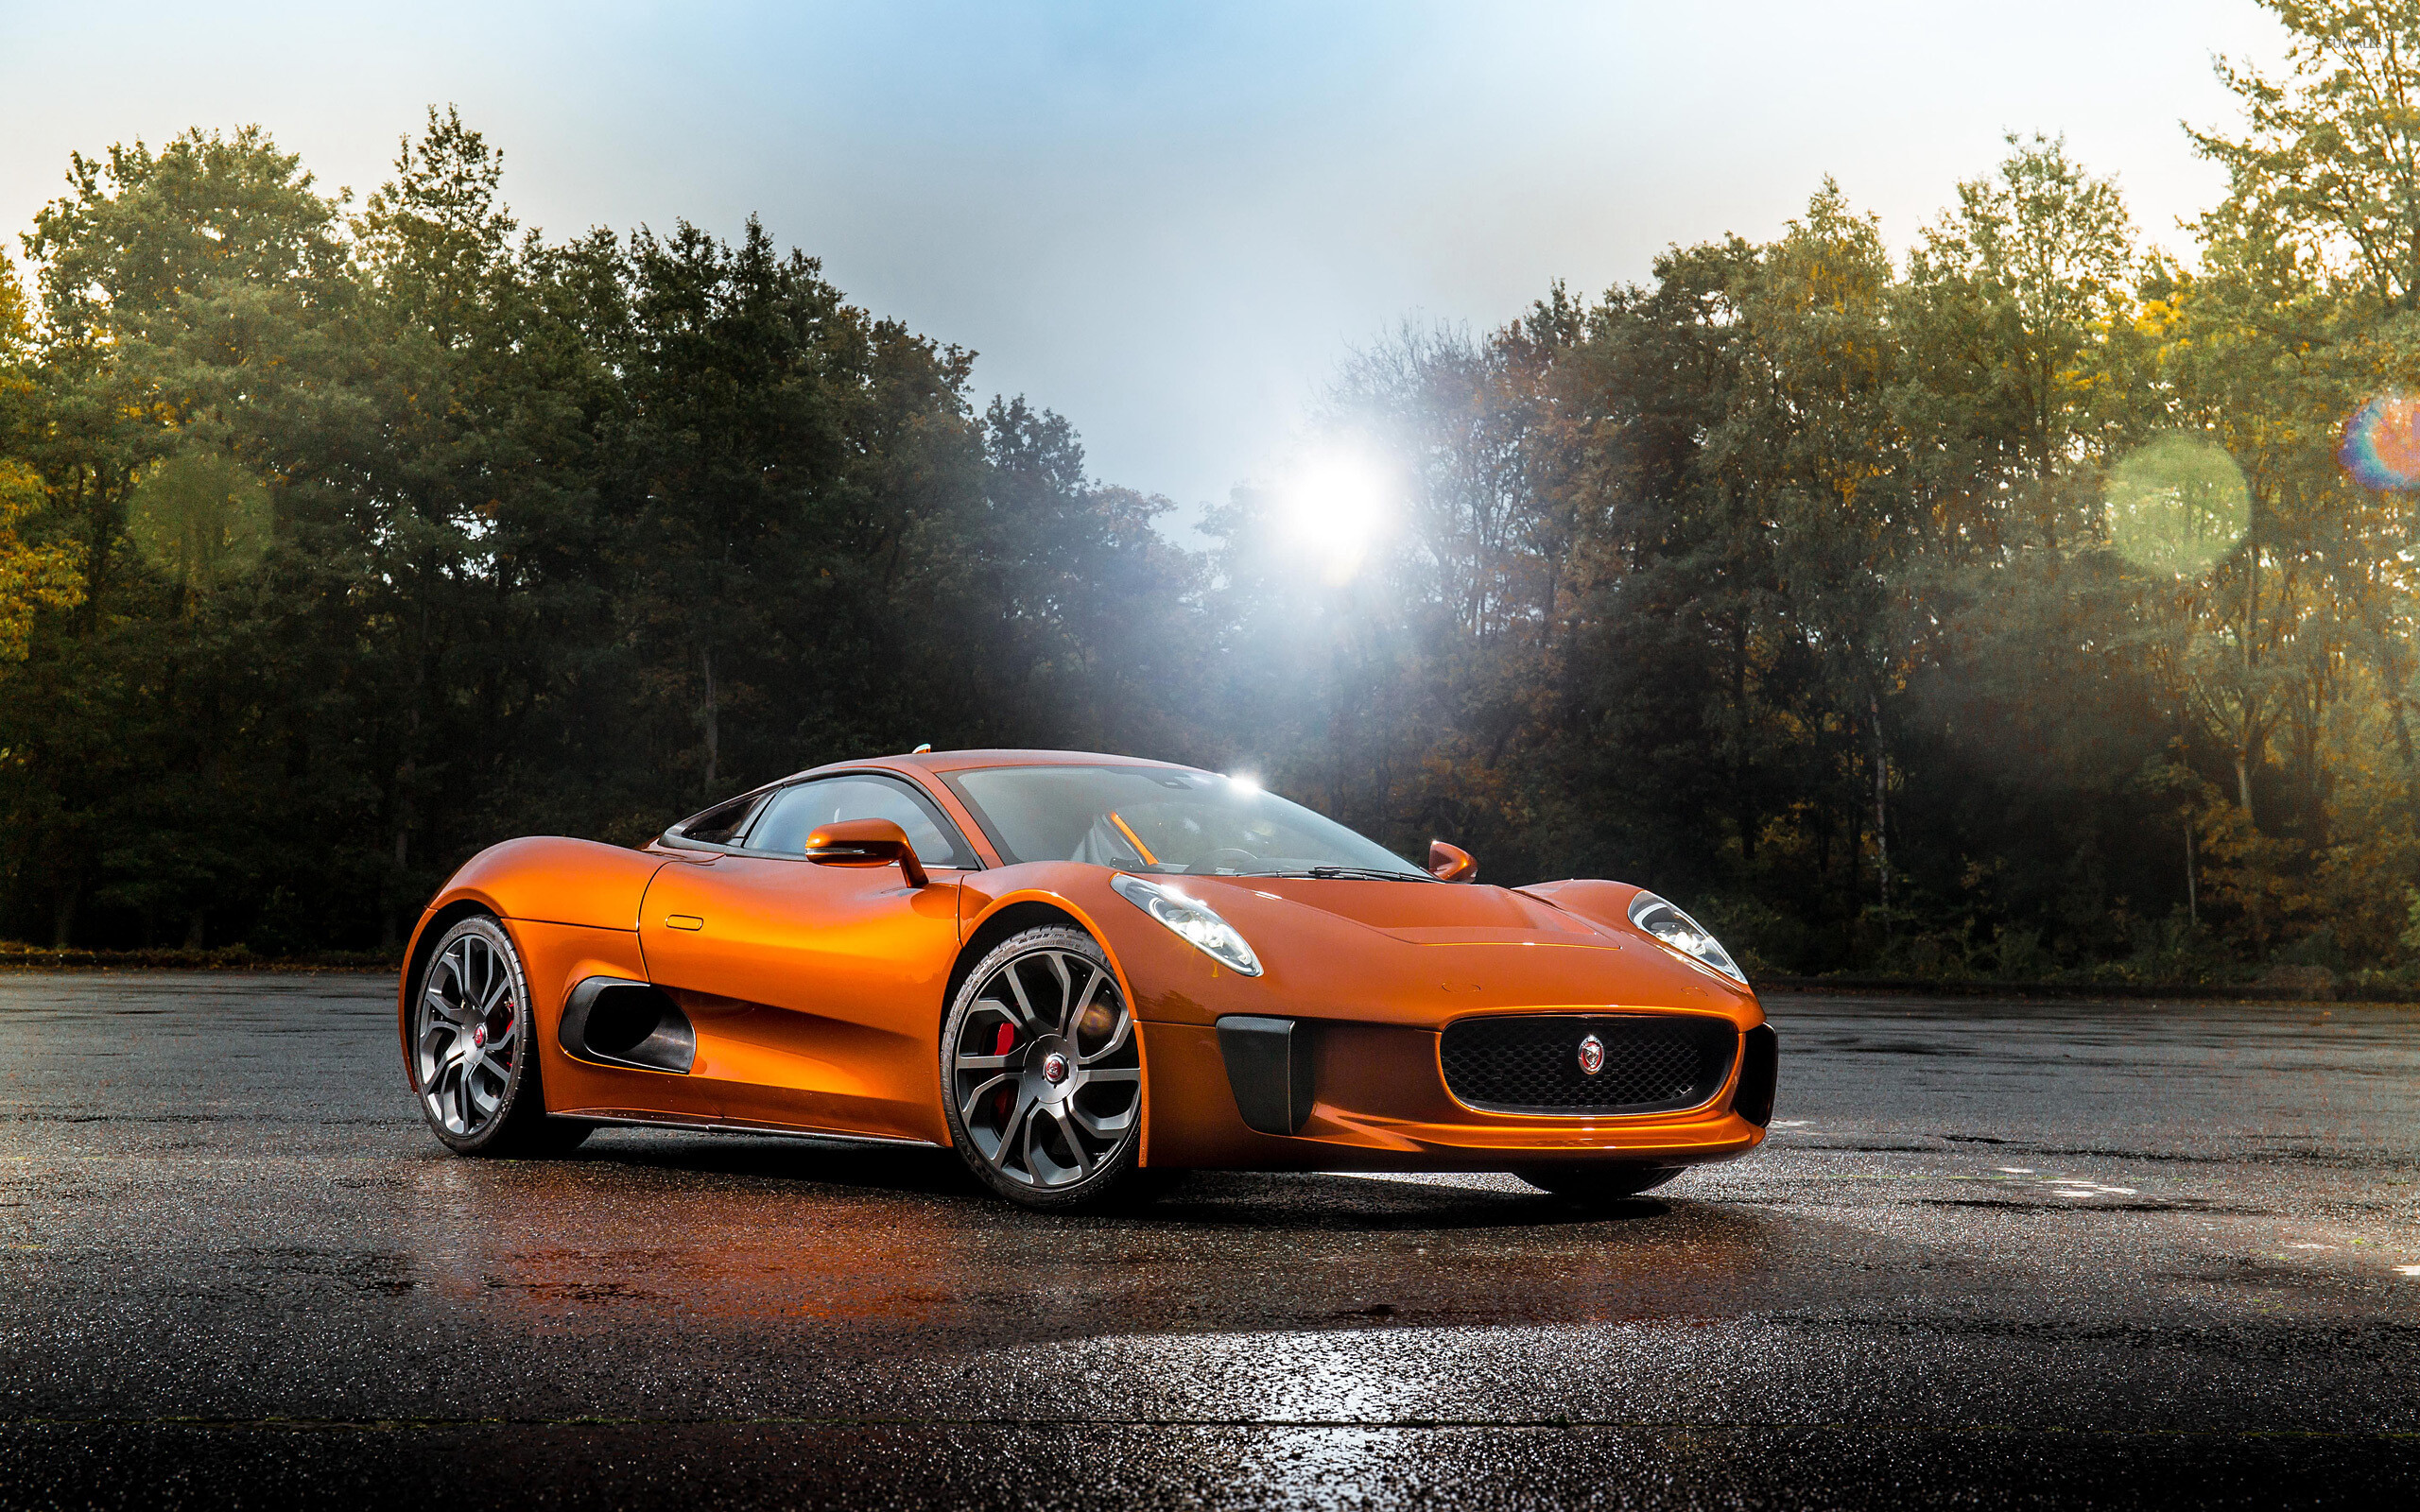 Jaguar Cars: C-X75, A hybrid-electric, 2-seat, concept car produced by British automobile manufacturer in partnership with the derivative of the Formula One team. 2560x1600 HD Wallpaper.